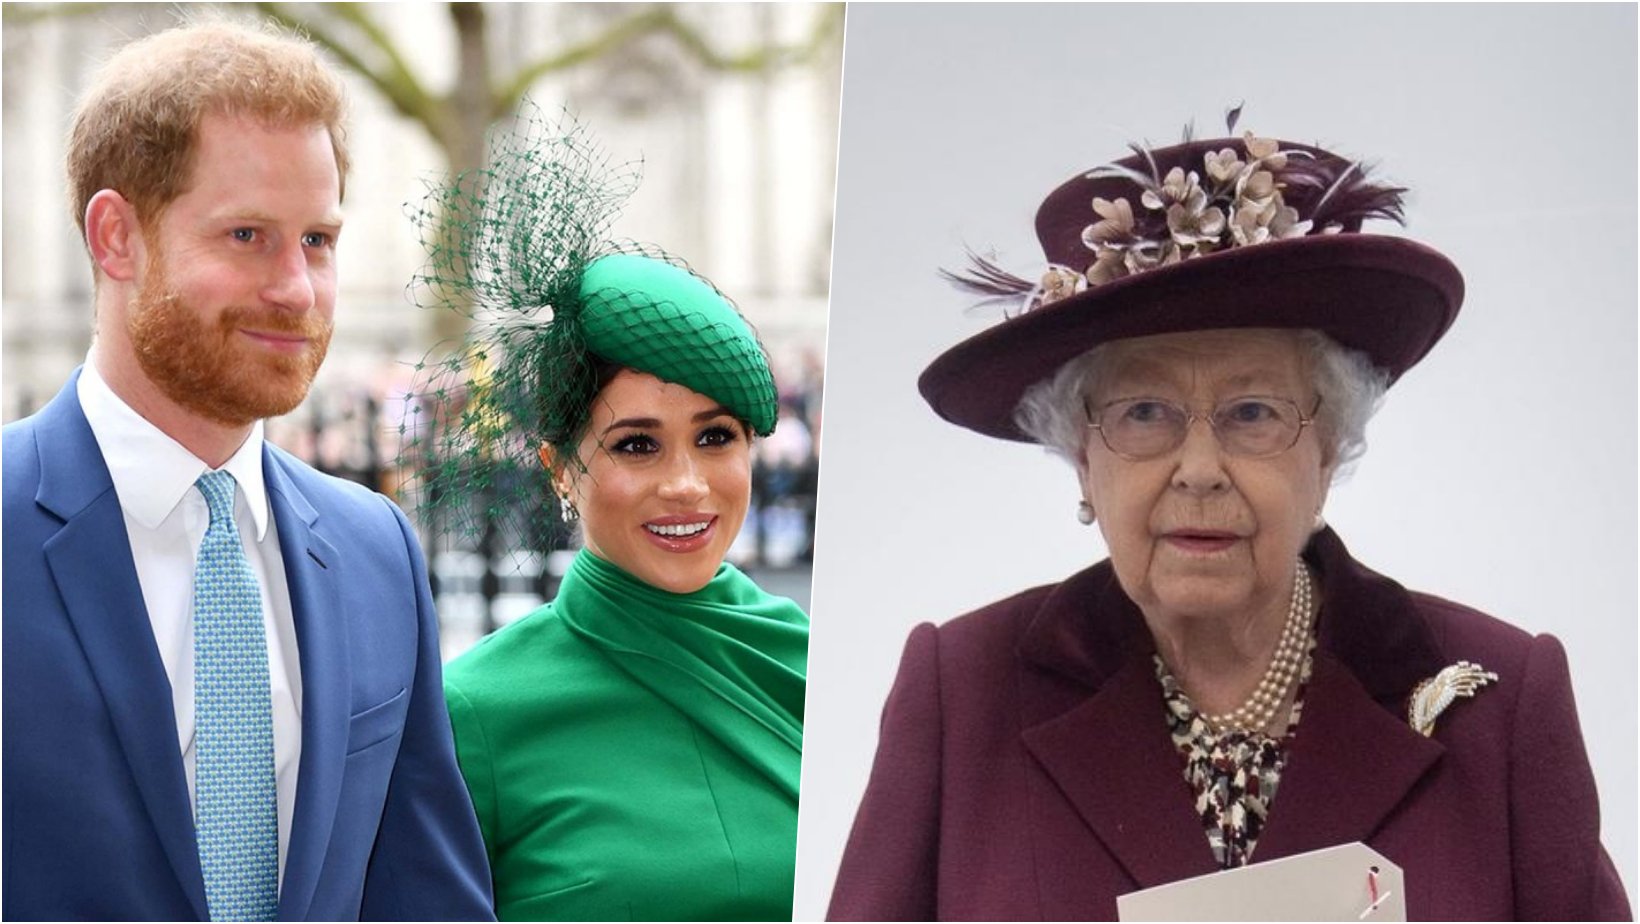 6 facebook cover 13.png?resize=1200,630 - Prince Harry And Meghan Markle Have Been Demoted On The Royal Family’s Website